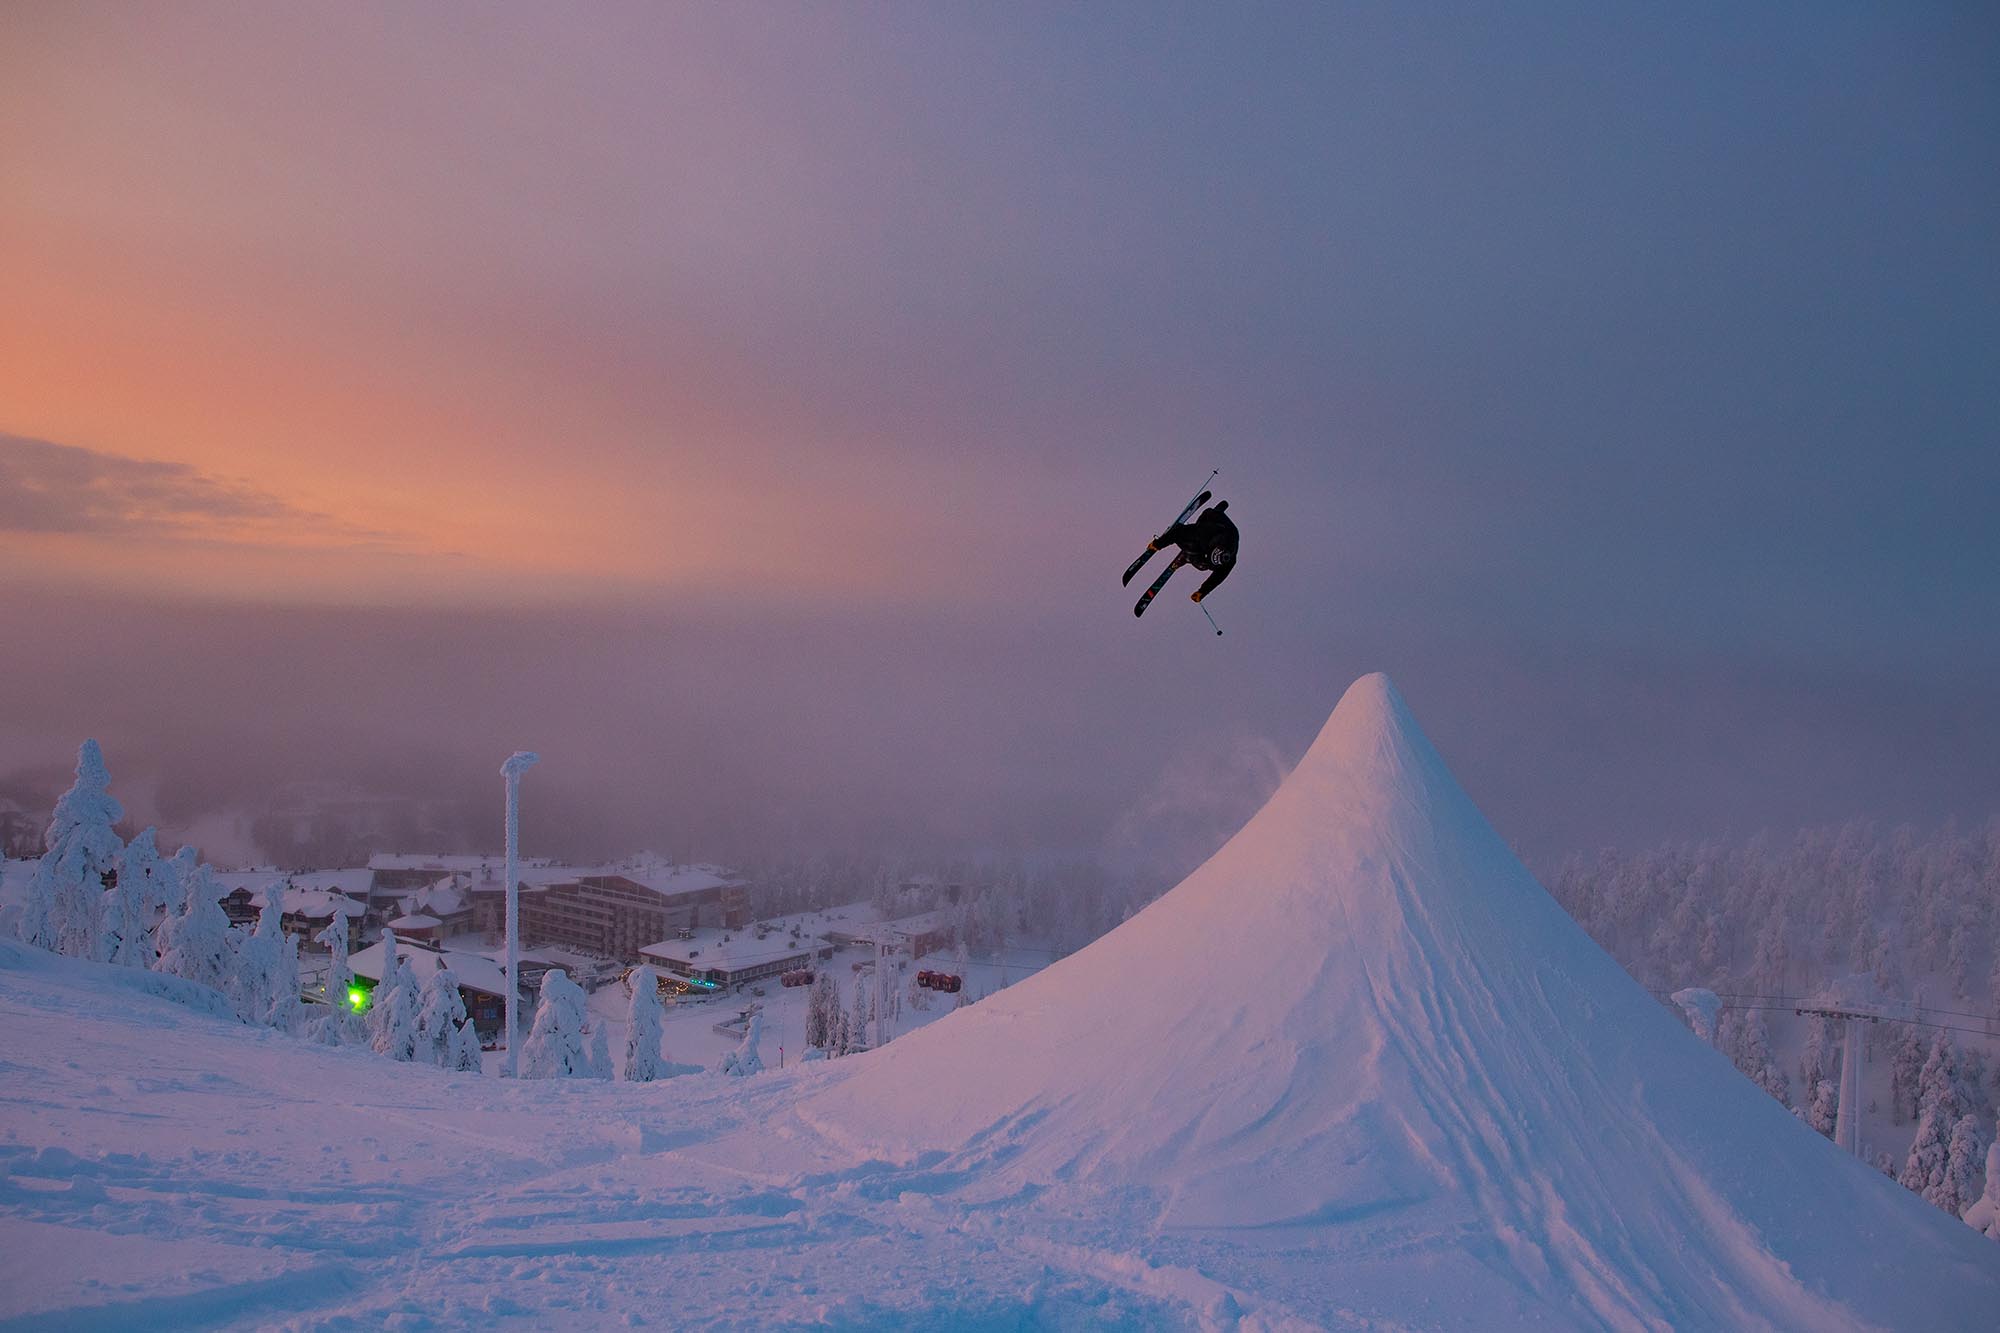 Antti Ollila skiing in Ruka, Finland for the 2021 Faction film ROOTS.